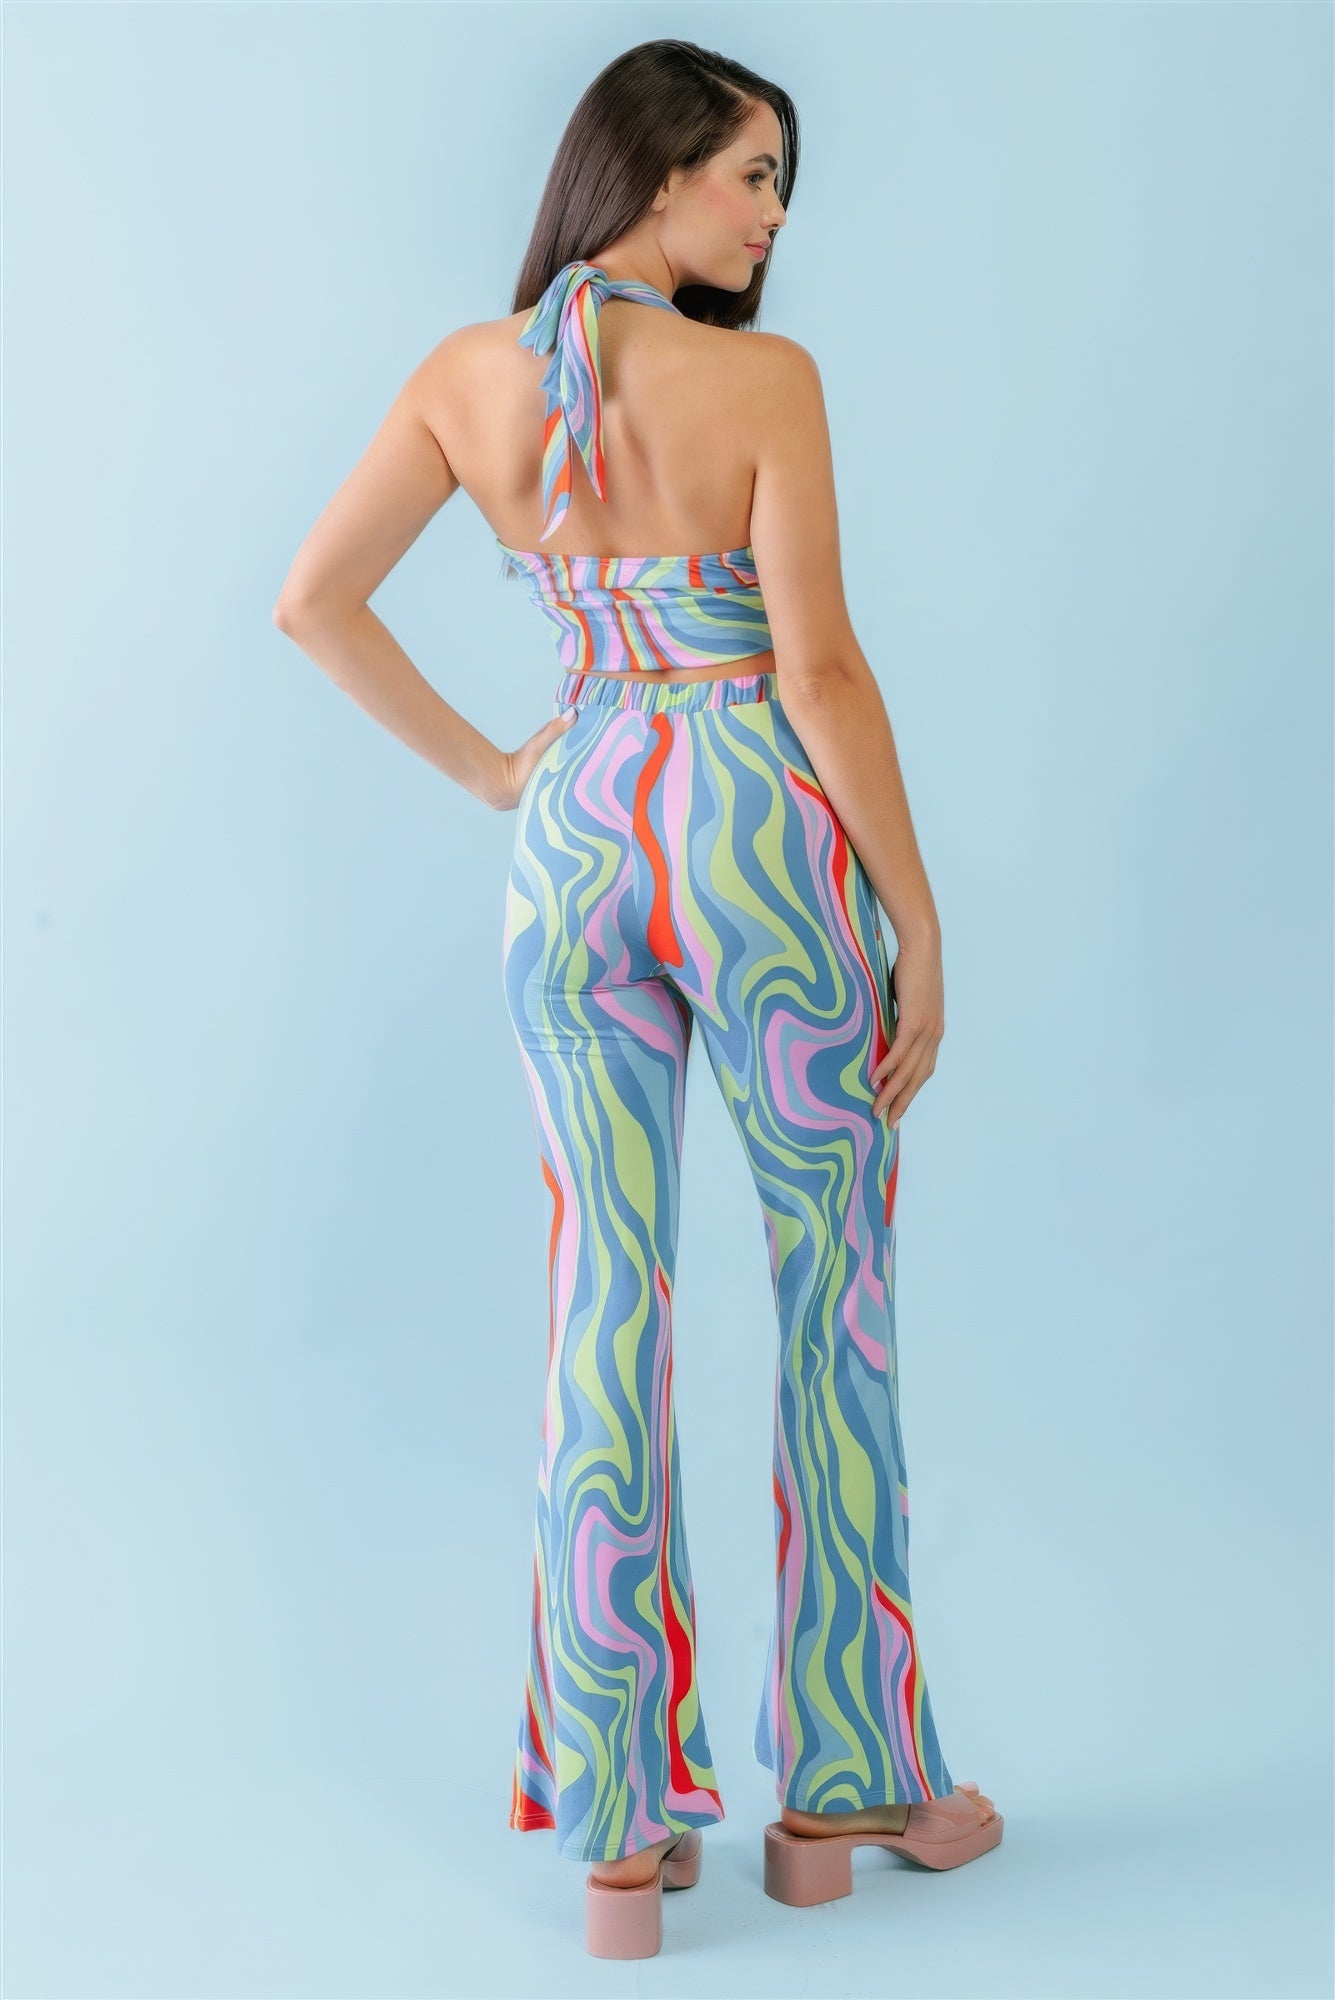 Blue Zone Planet |  Suzy's Multicolor Abstract Print Halter V-neck Ruched Open Back Crop Top & High Waist Pants Set Blue Zone Planet